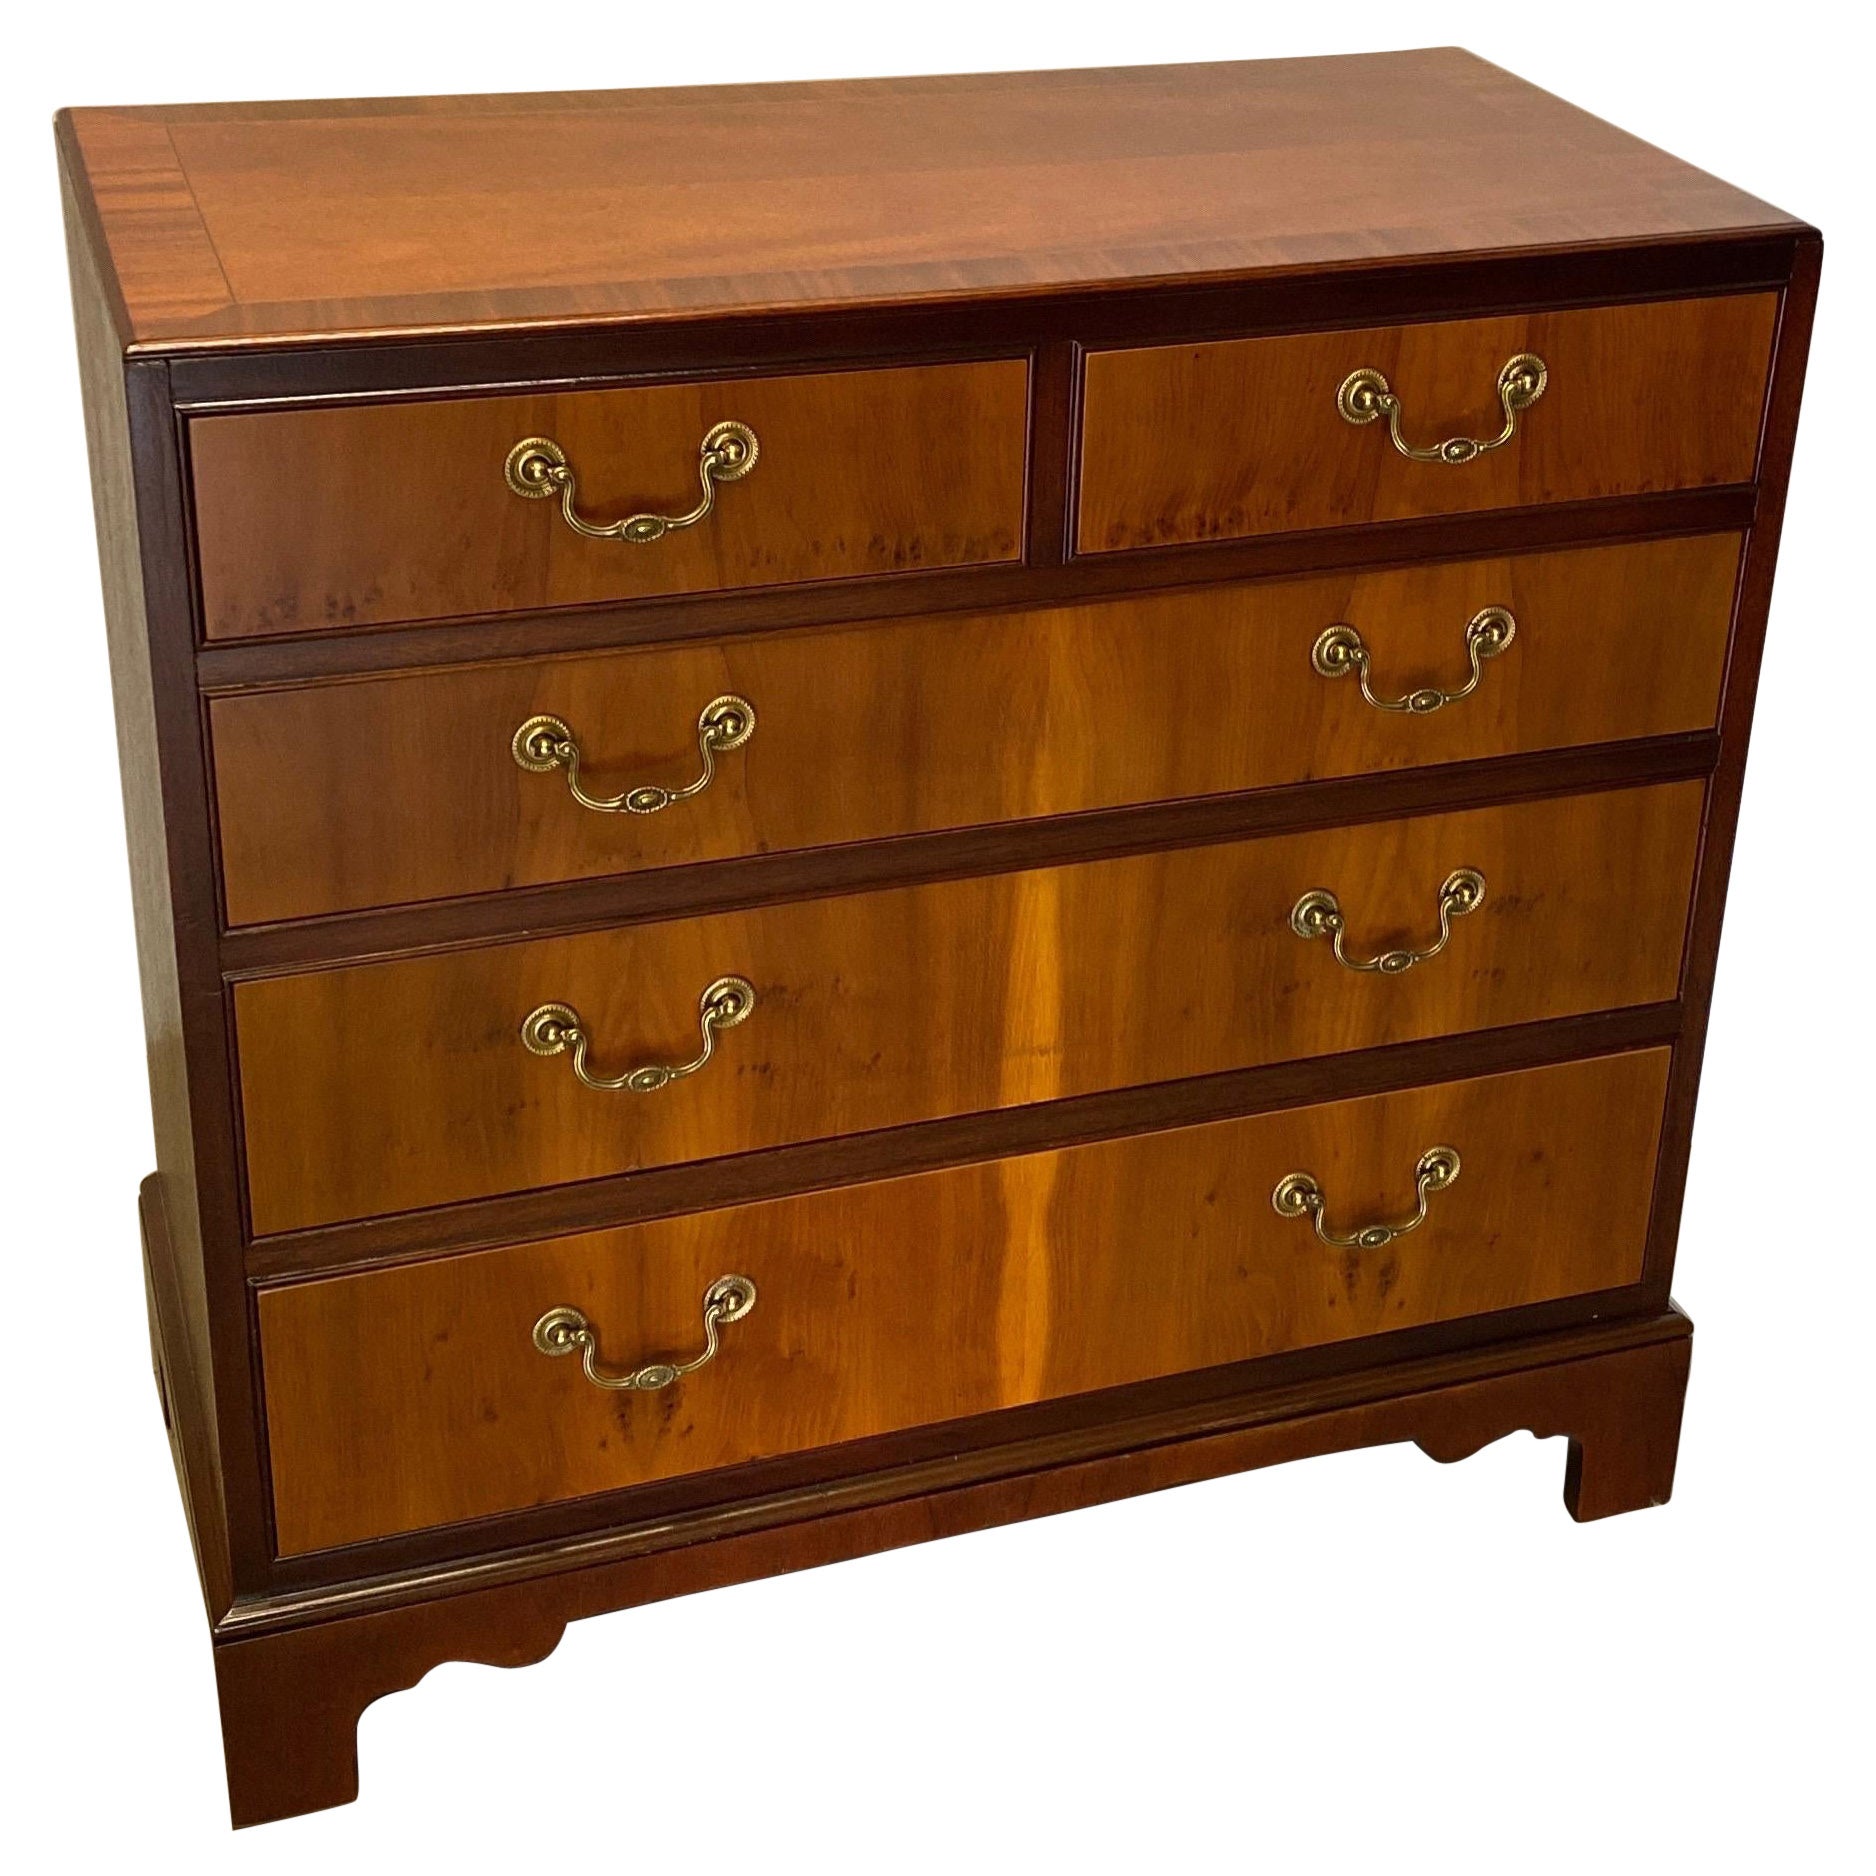 Mahogany and Yew Wood Bachelors Chest by Baker Furniture